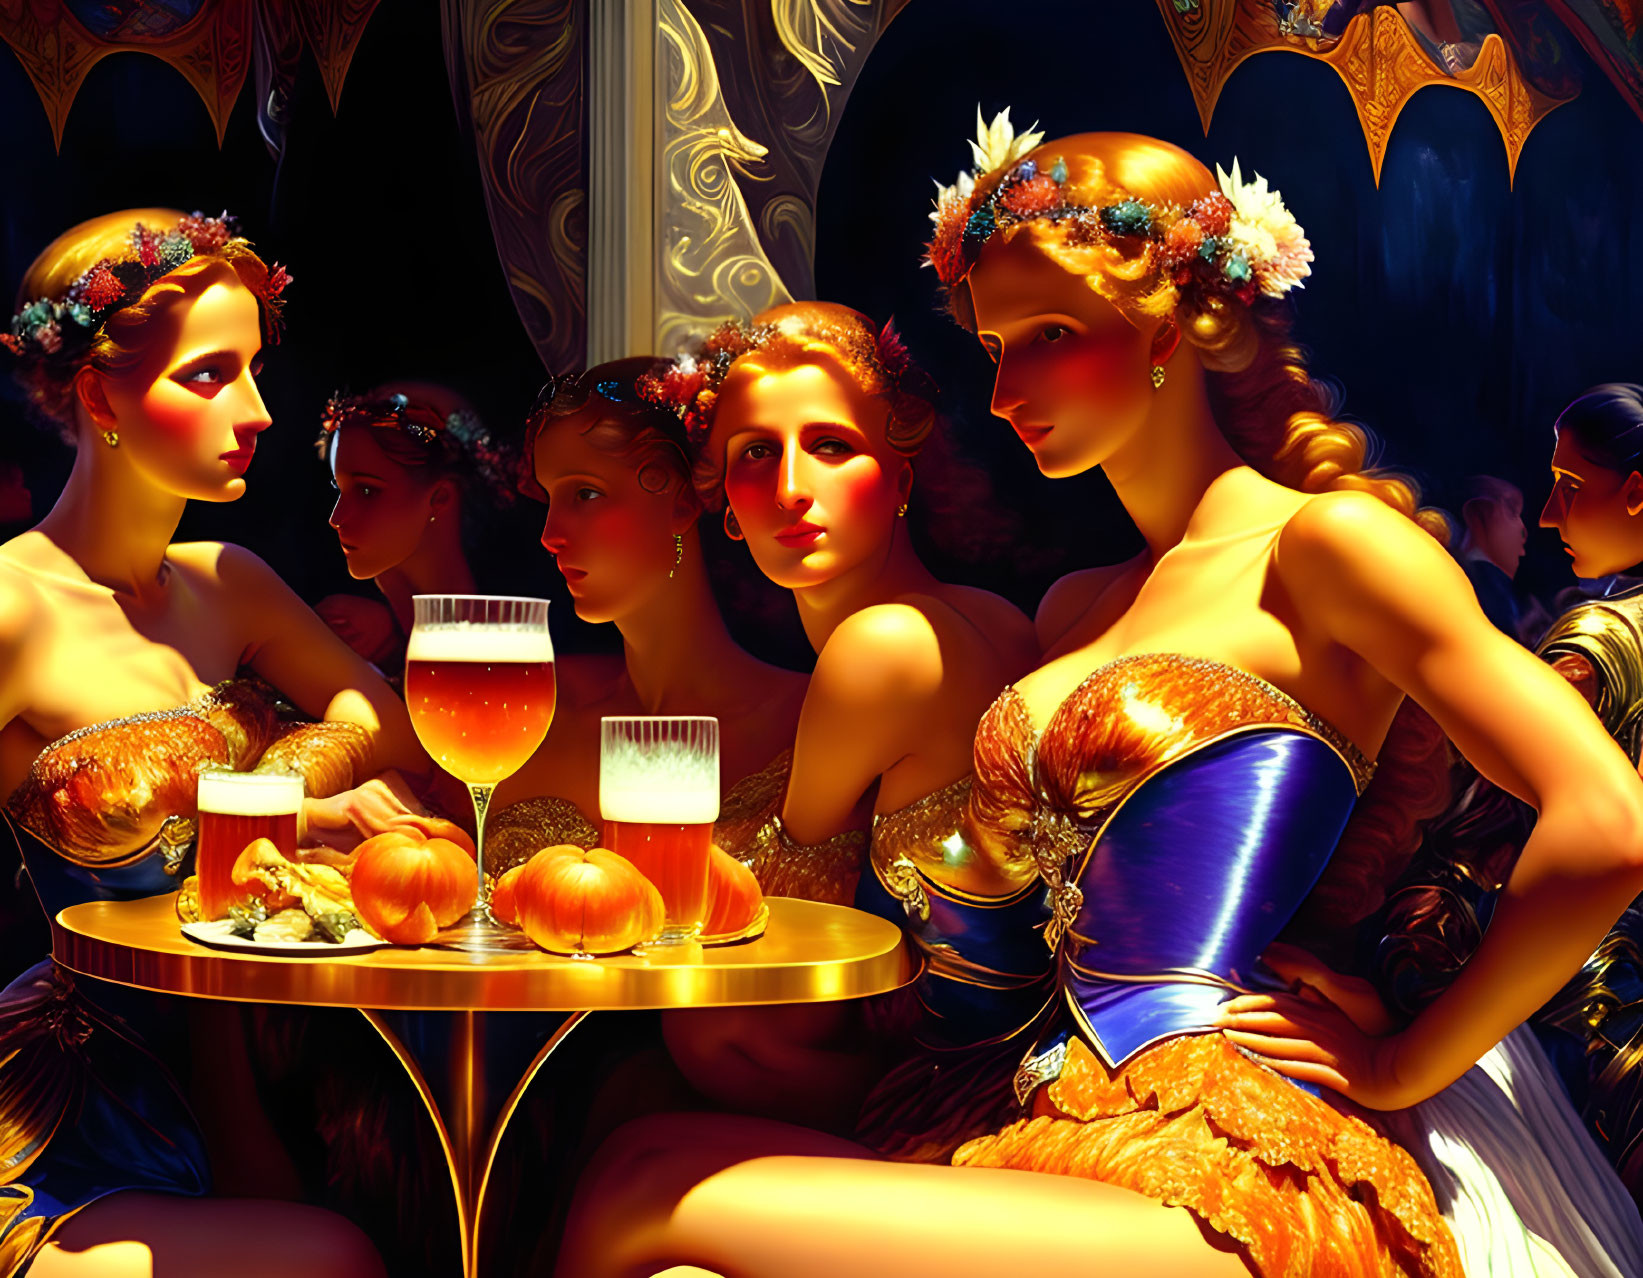 Four women in vintage dresses with flowers, sitting at a golden-lit table.